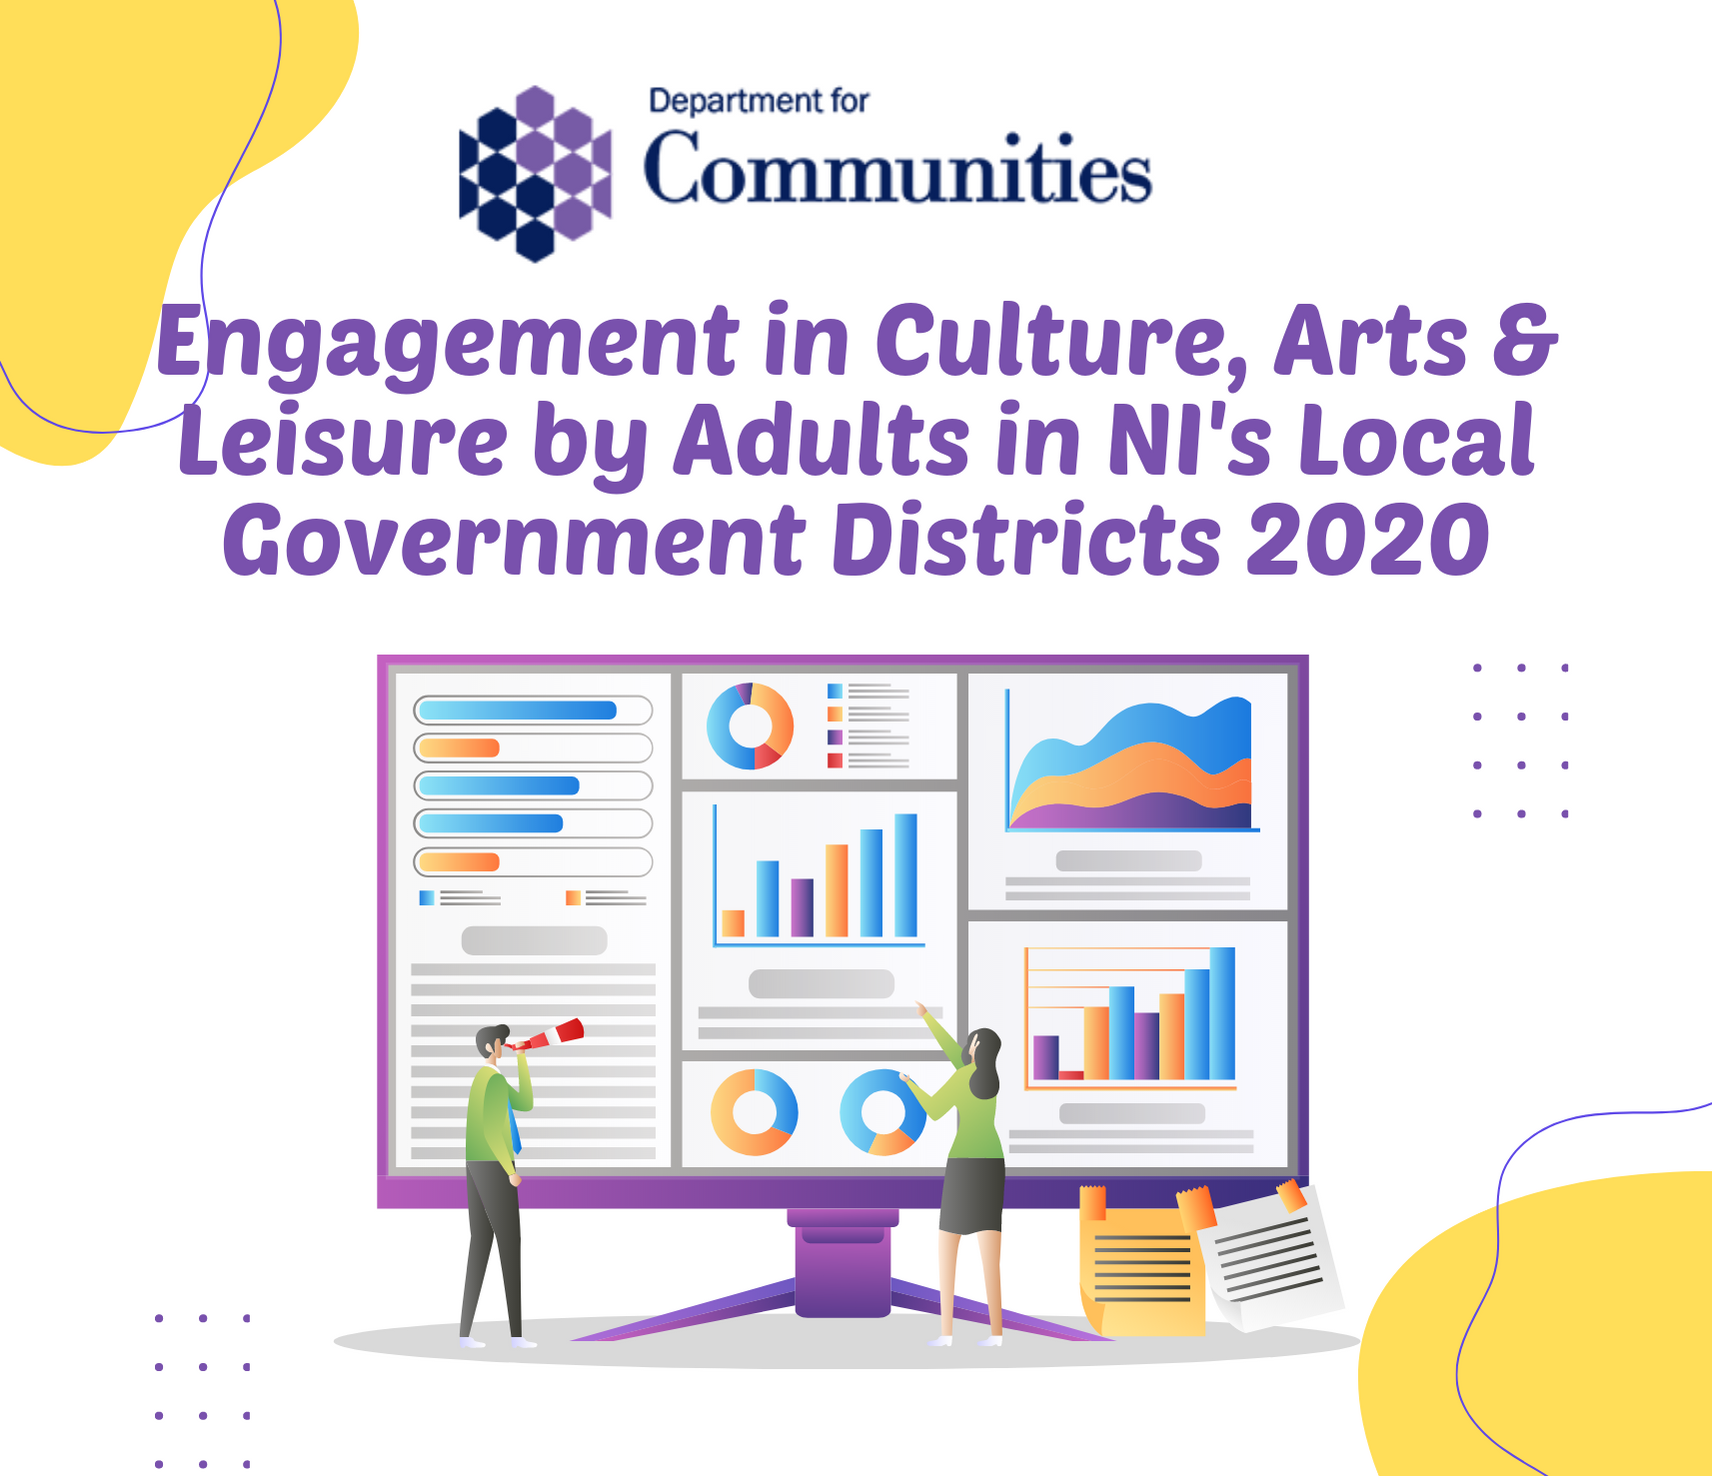 Engagement in culture, arts & leisure by adults in NI's local government districts 2020